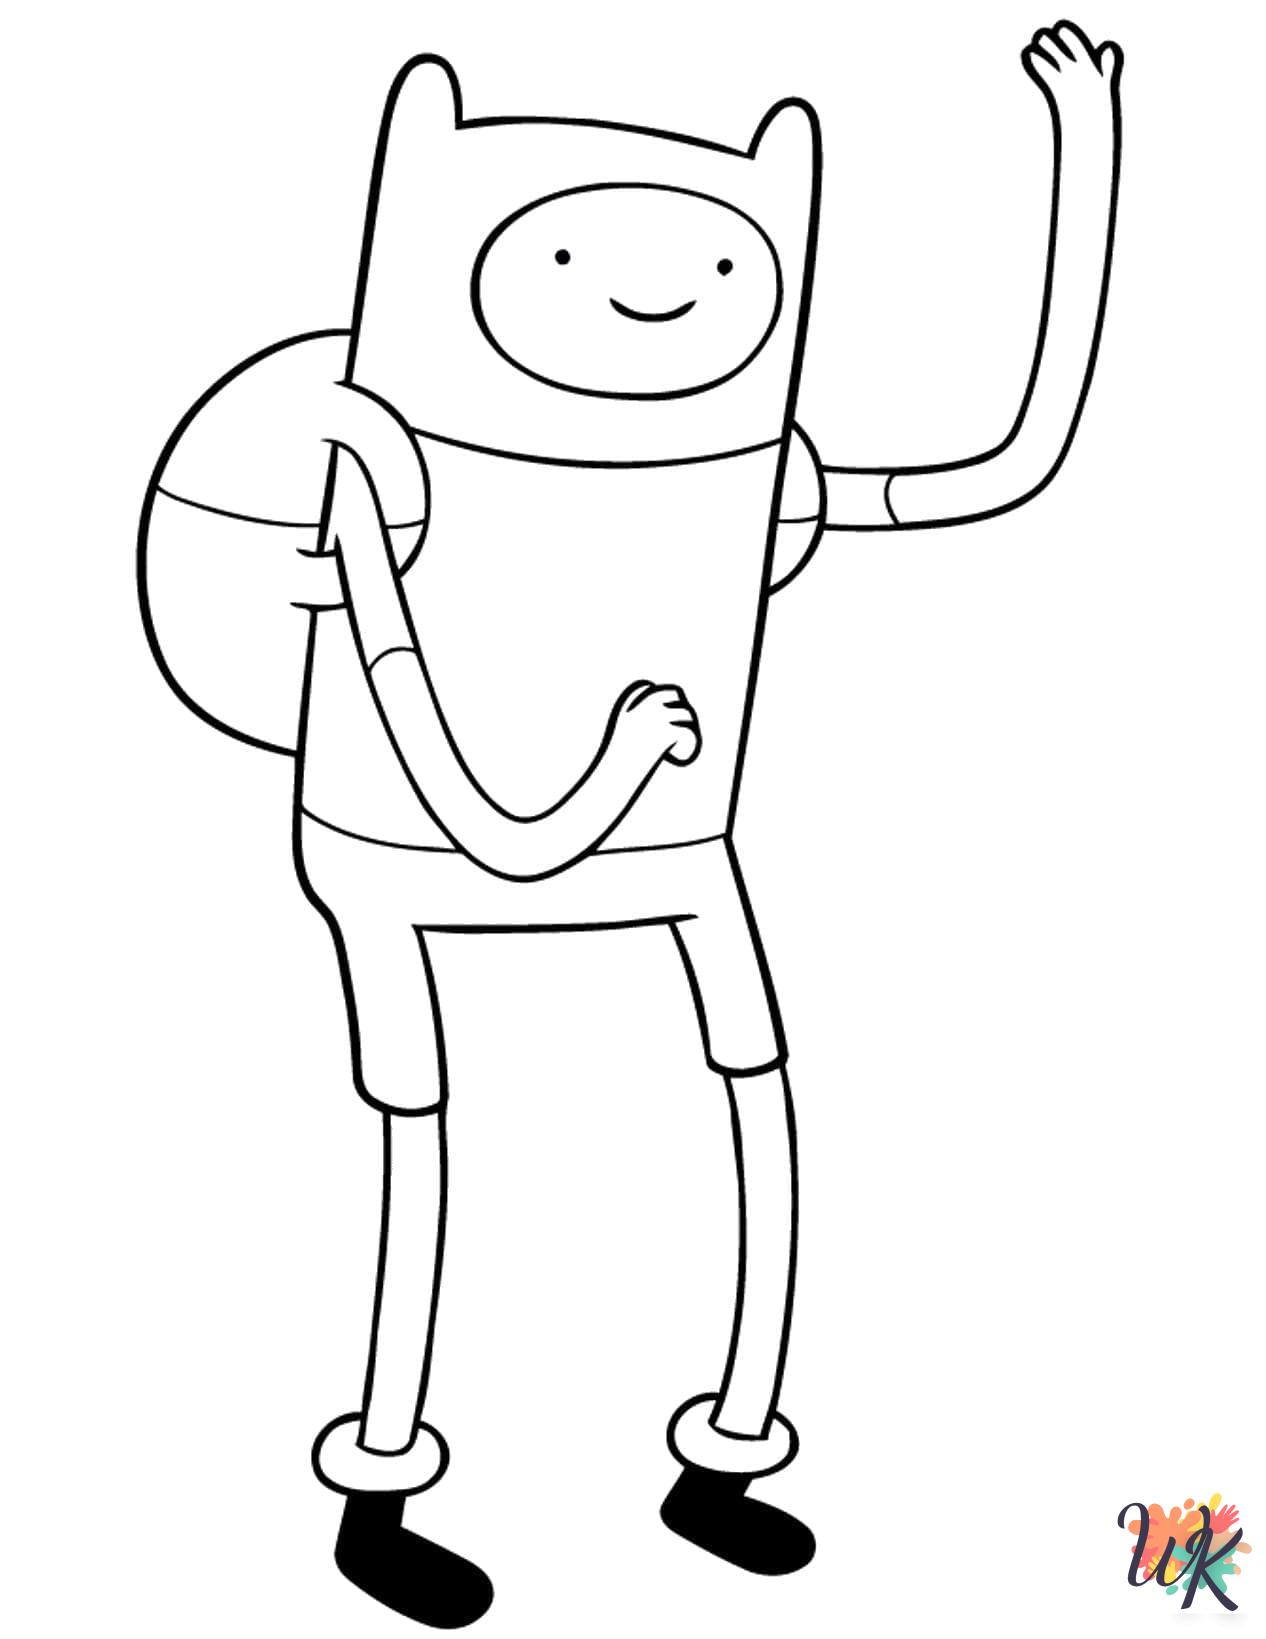 kawaii cute Adventure Time coloring pages